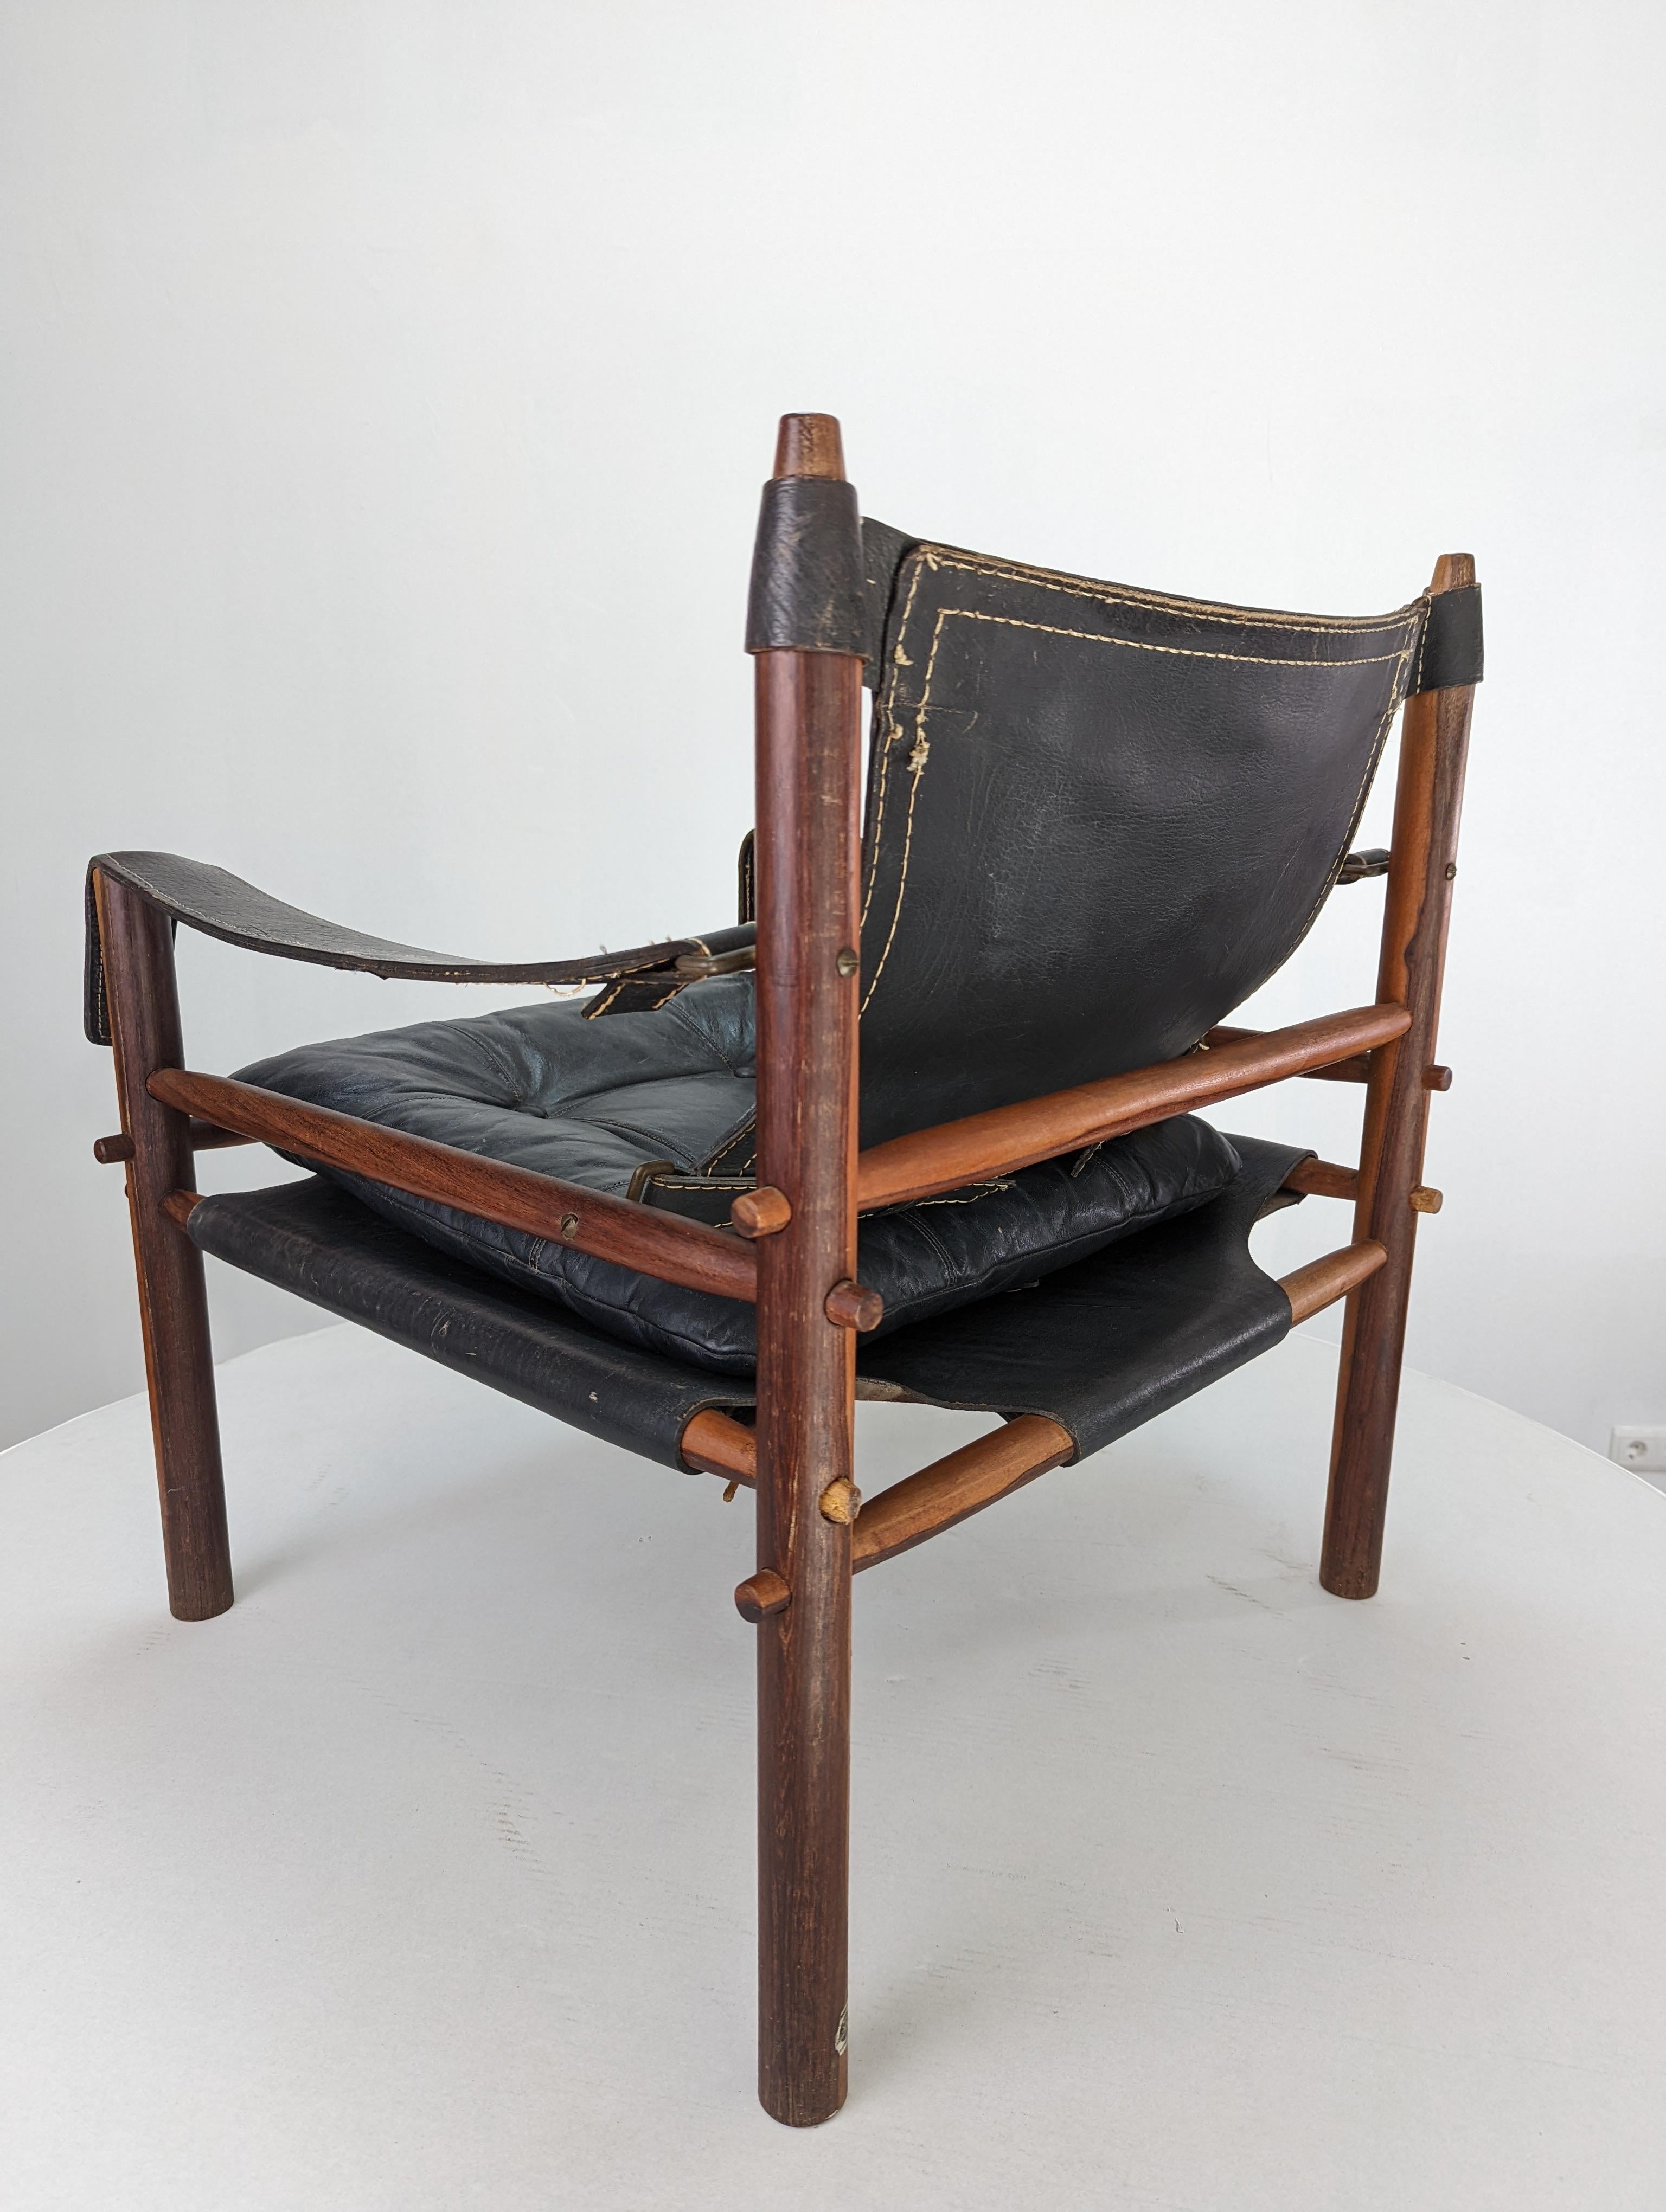 Mid-20th Century Pair of Sirocco Armchairs by Arne Norell for Scanform Colombia 1960s For Sale